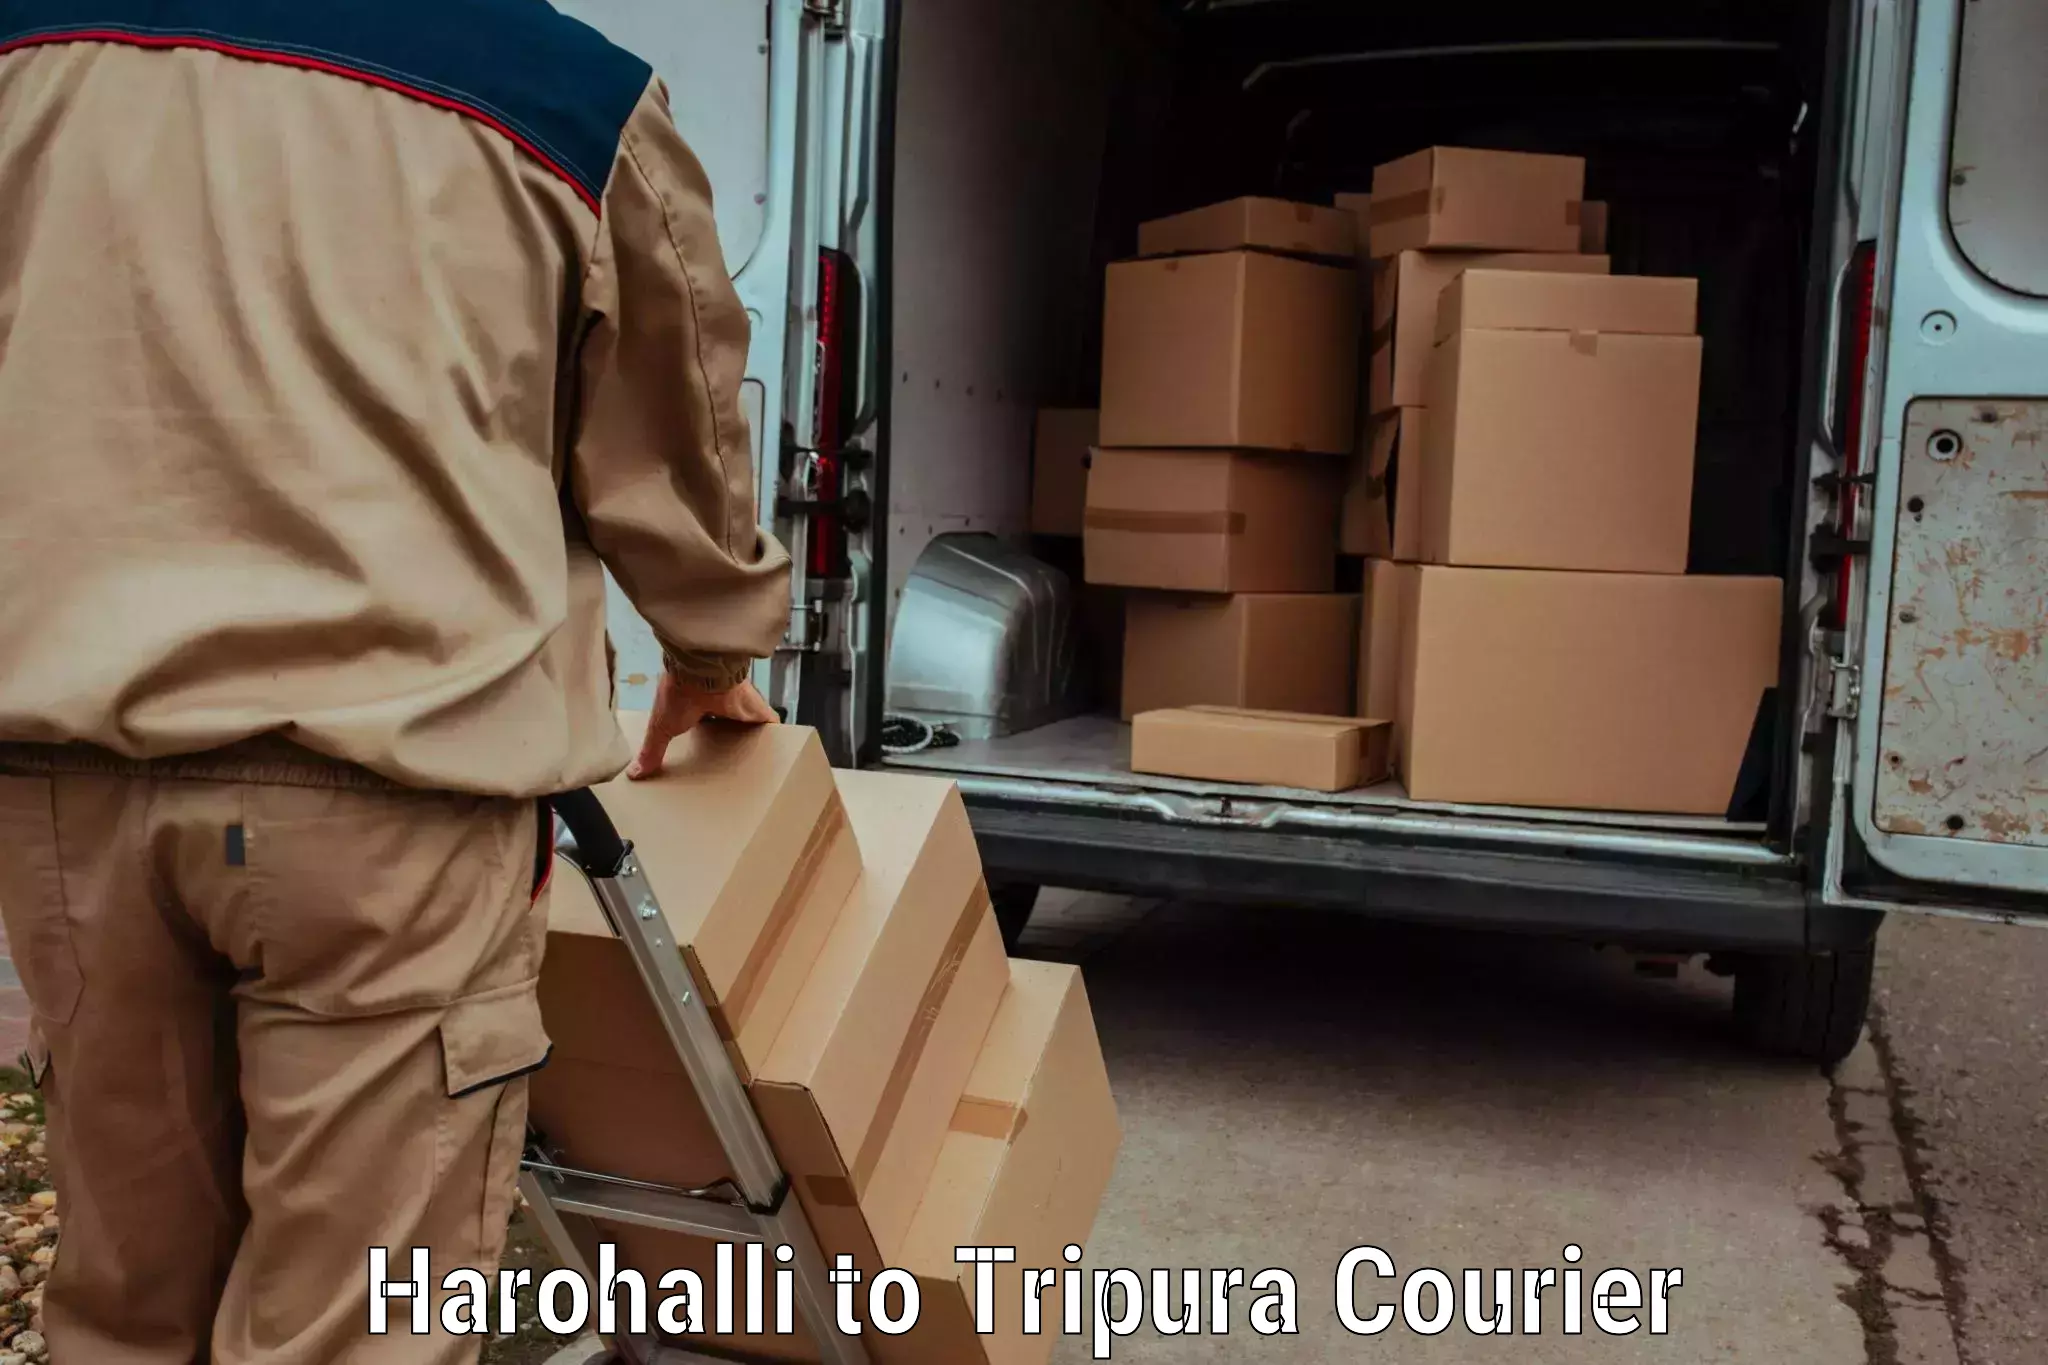 Multi-national courier services Harohalli to Udaipur Tripura